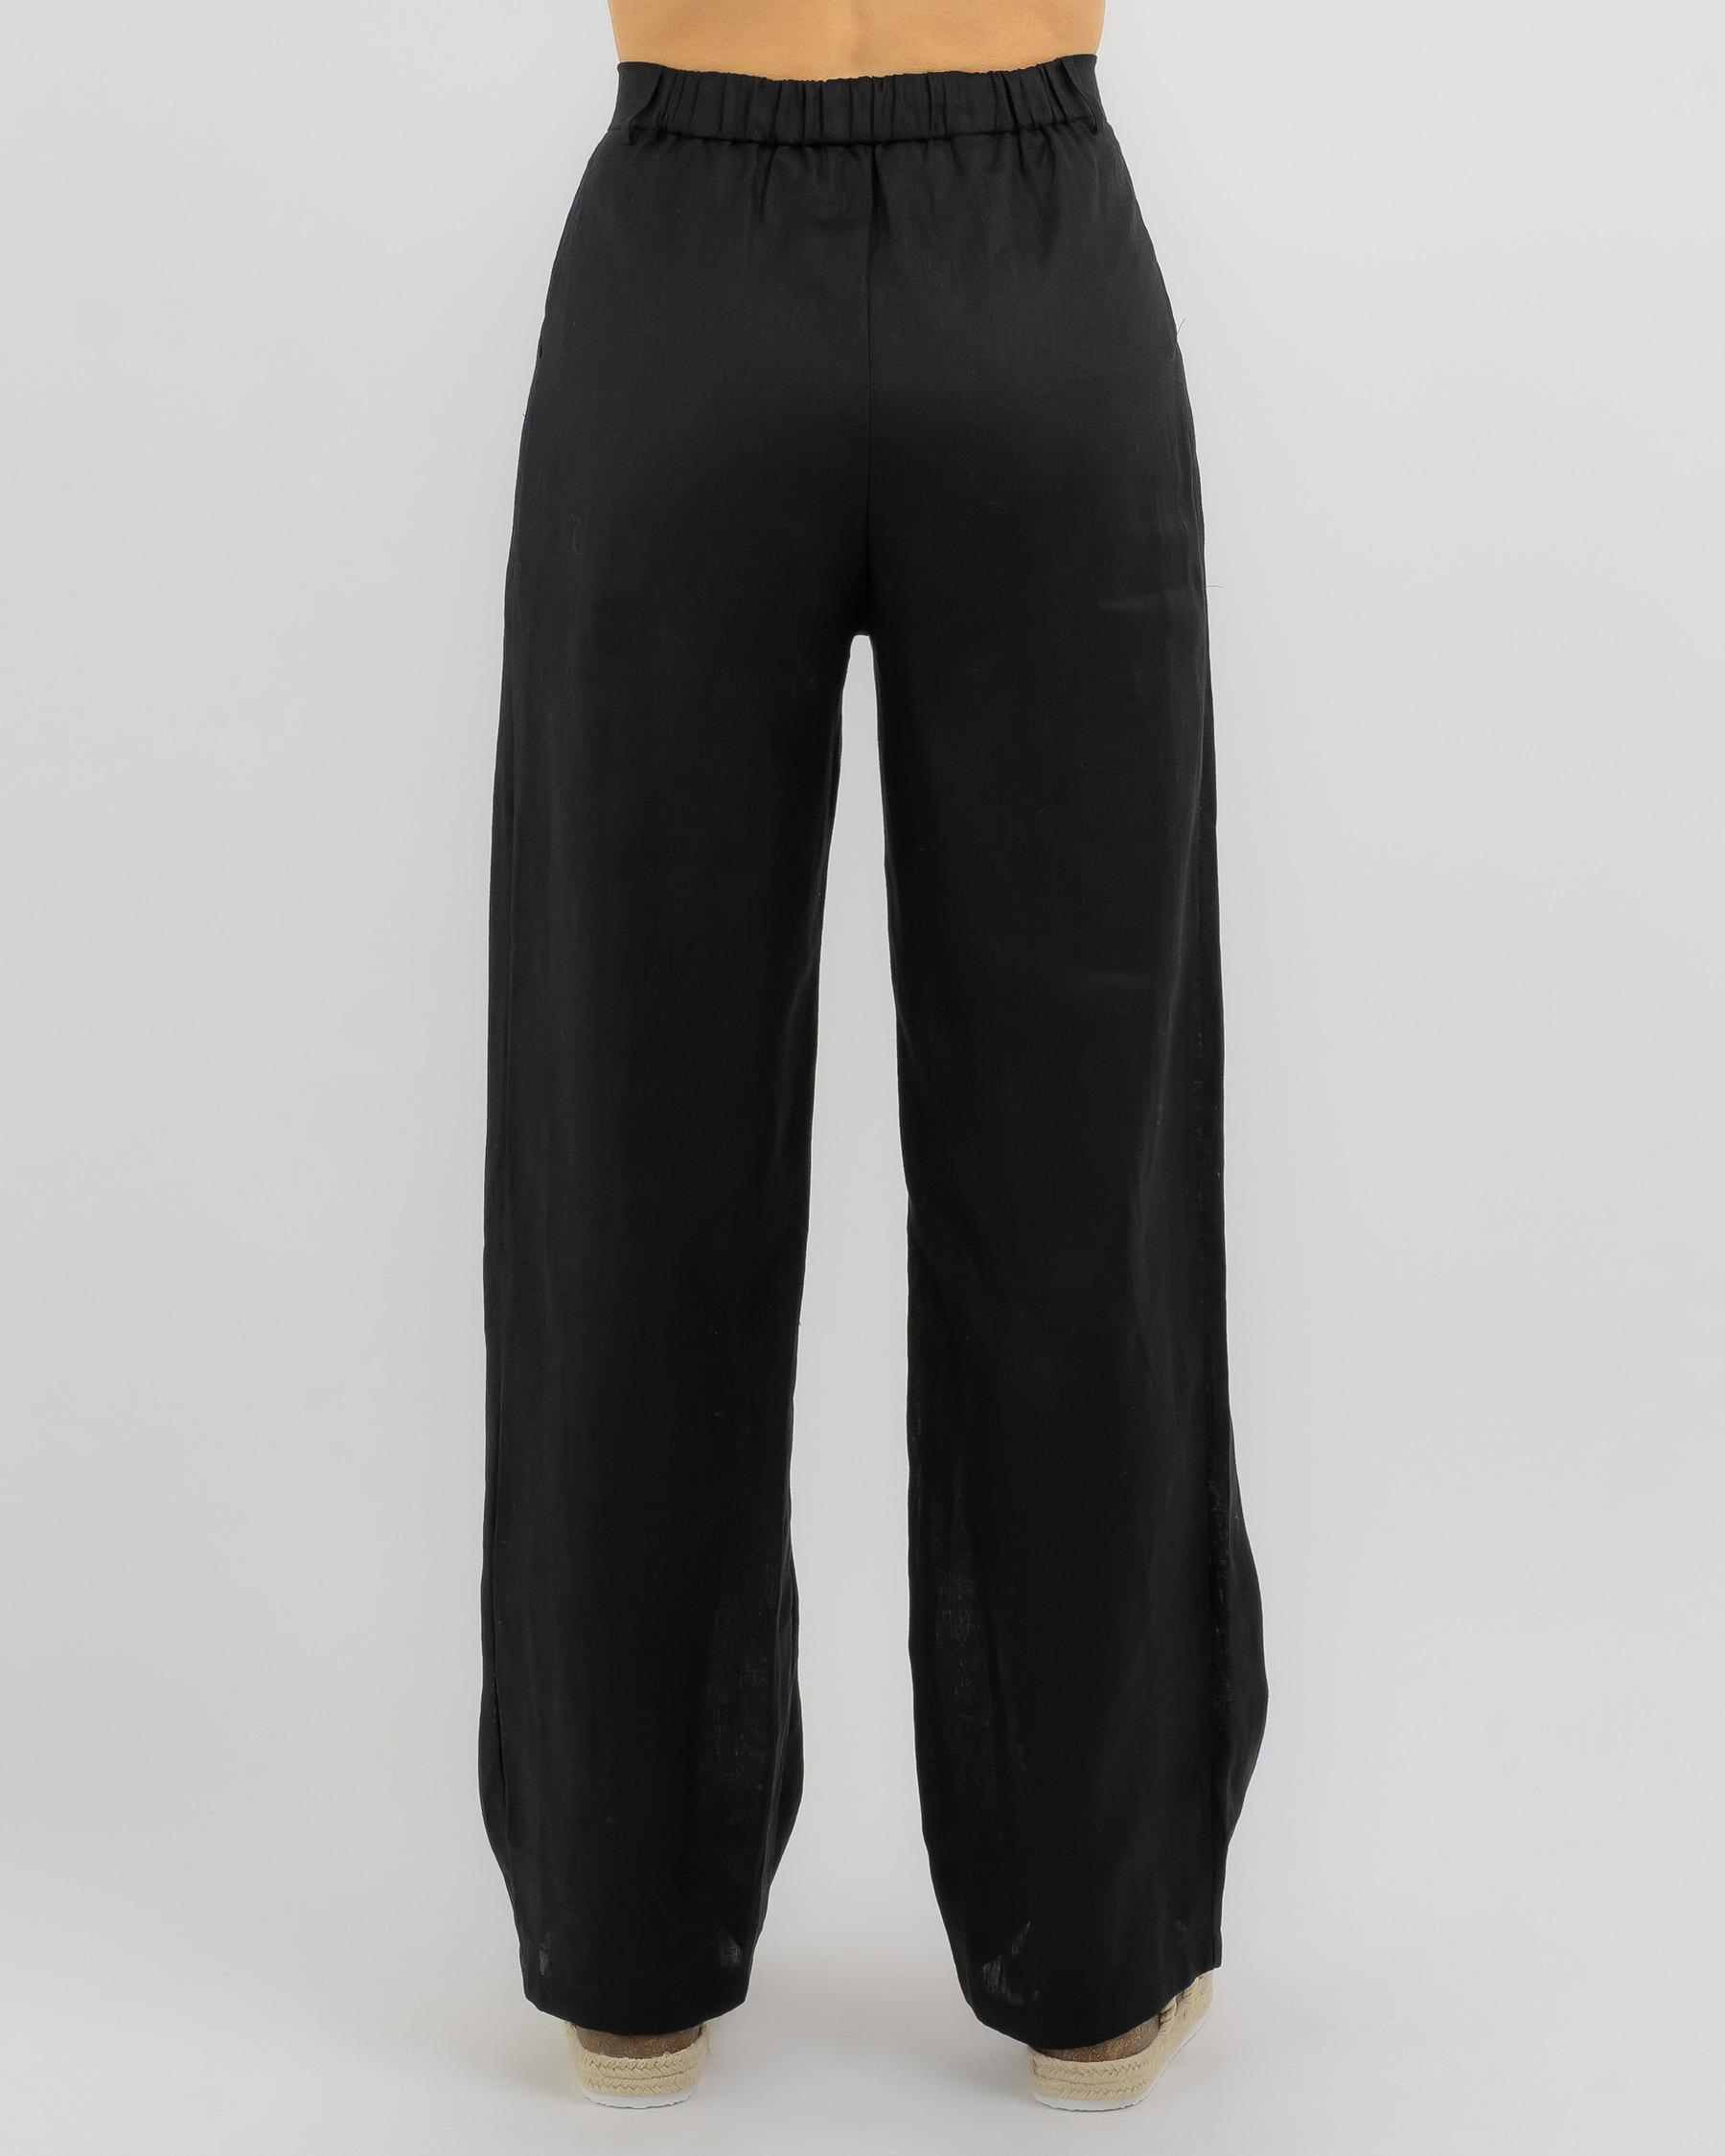 YH & Co Amelie Pants In Black - Fast Shipping & Easy Returns - City ...